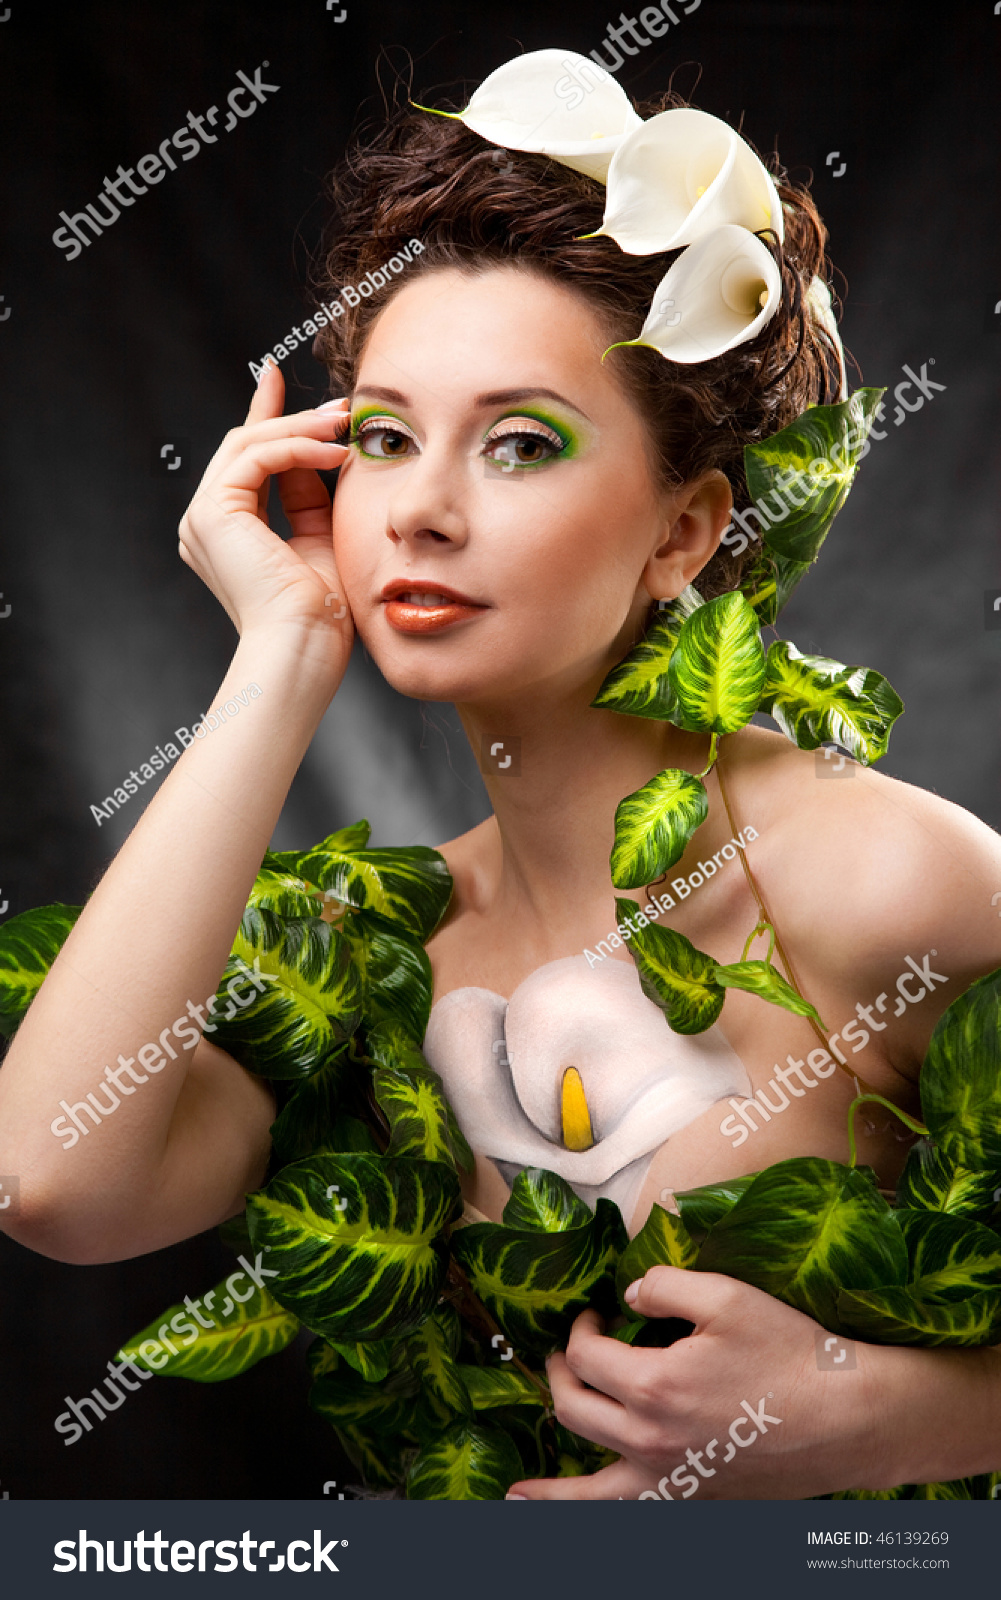 Beautiful Girl With Body Art And White Flowers In Hair Stock Photo ...